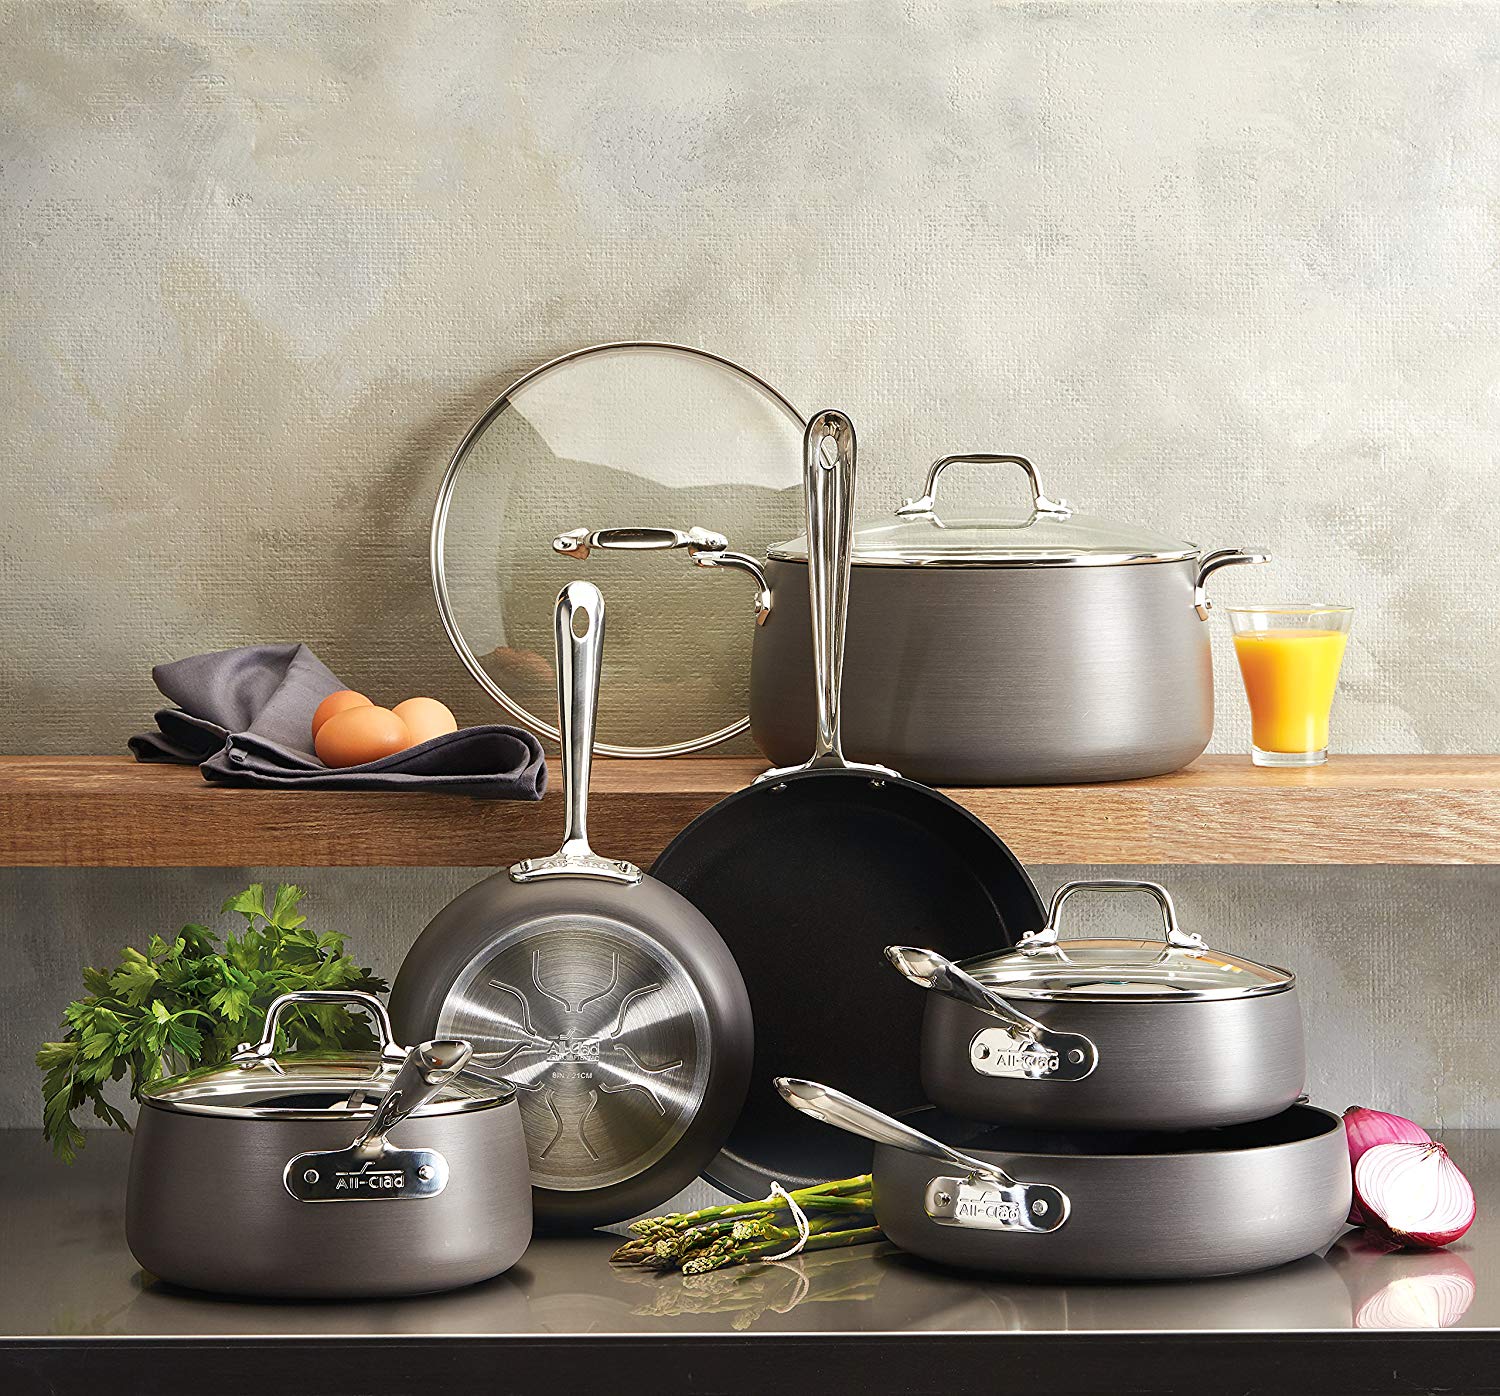 Top 10 Best Hard Anodized Cookwares in 2020 Reviews & Buyer's Guide